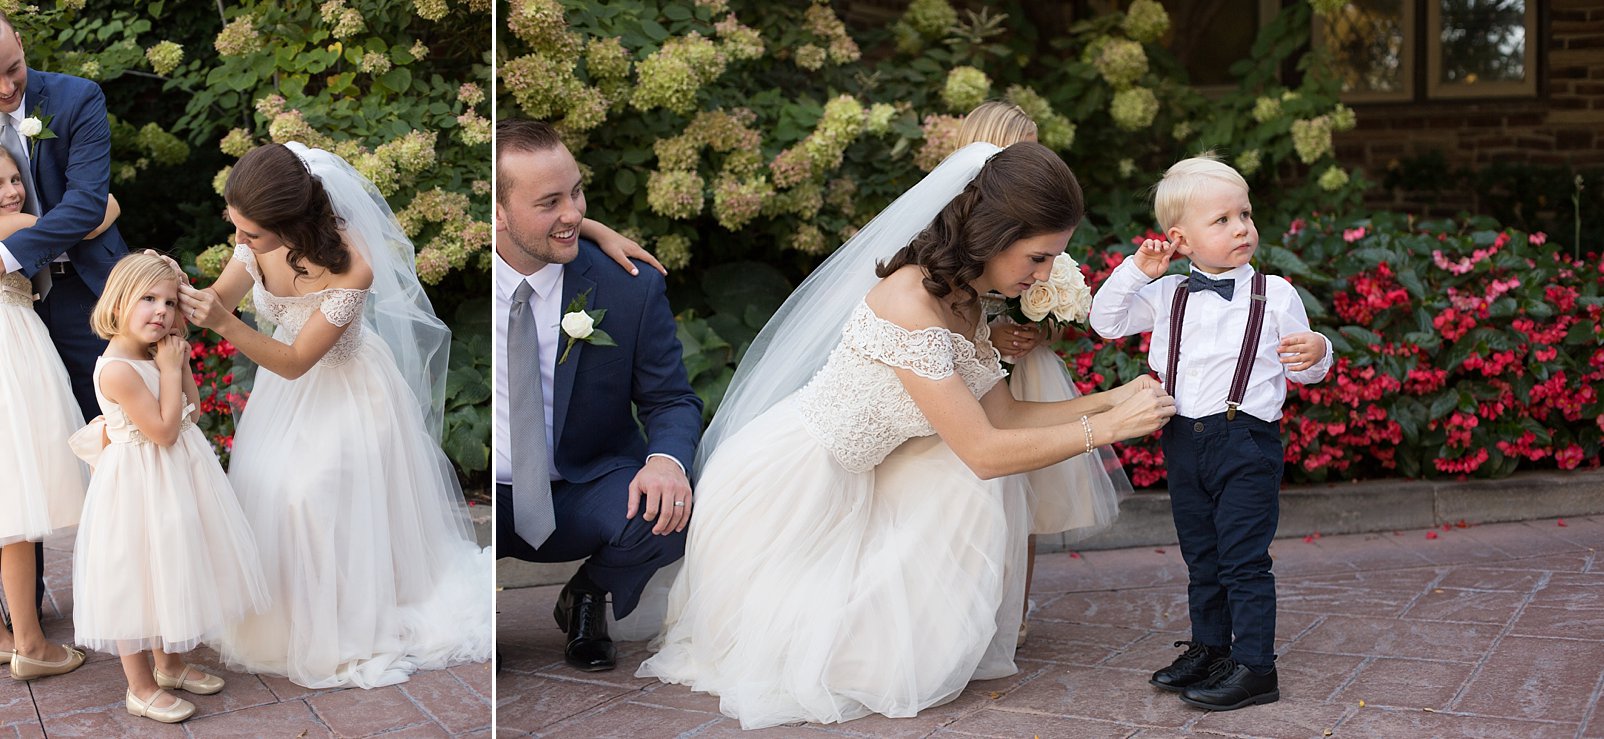 bride helping flower girl with finishing touches